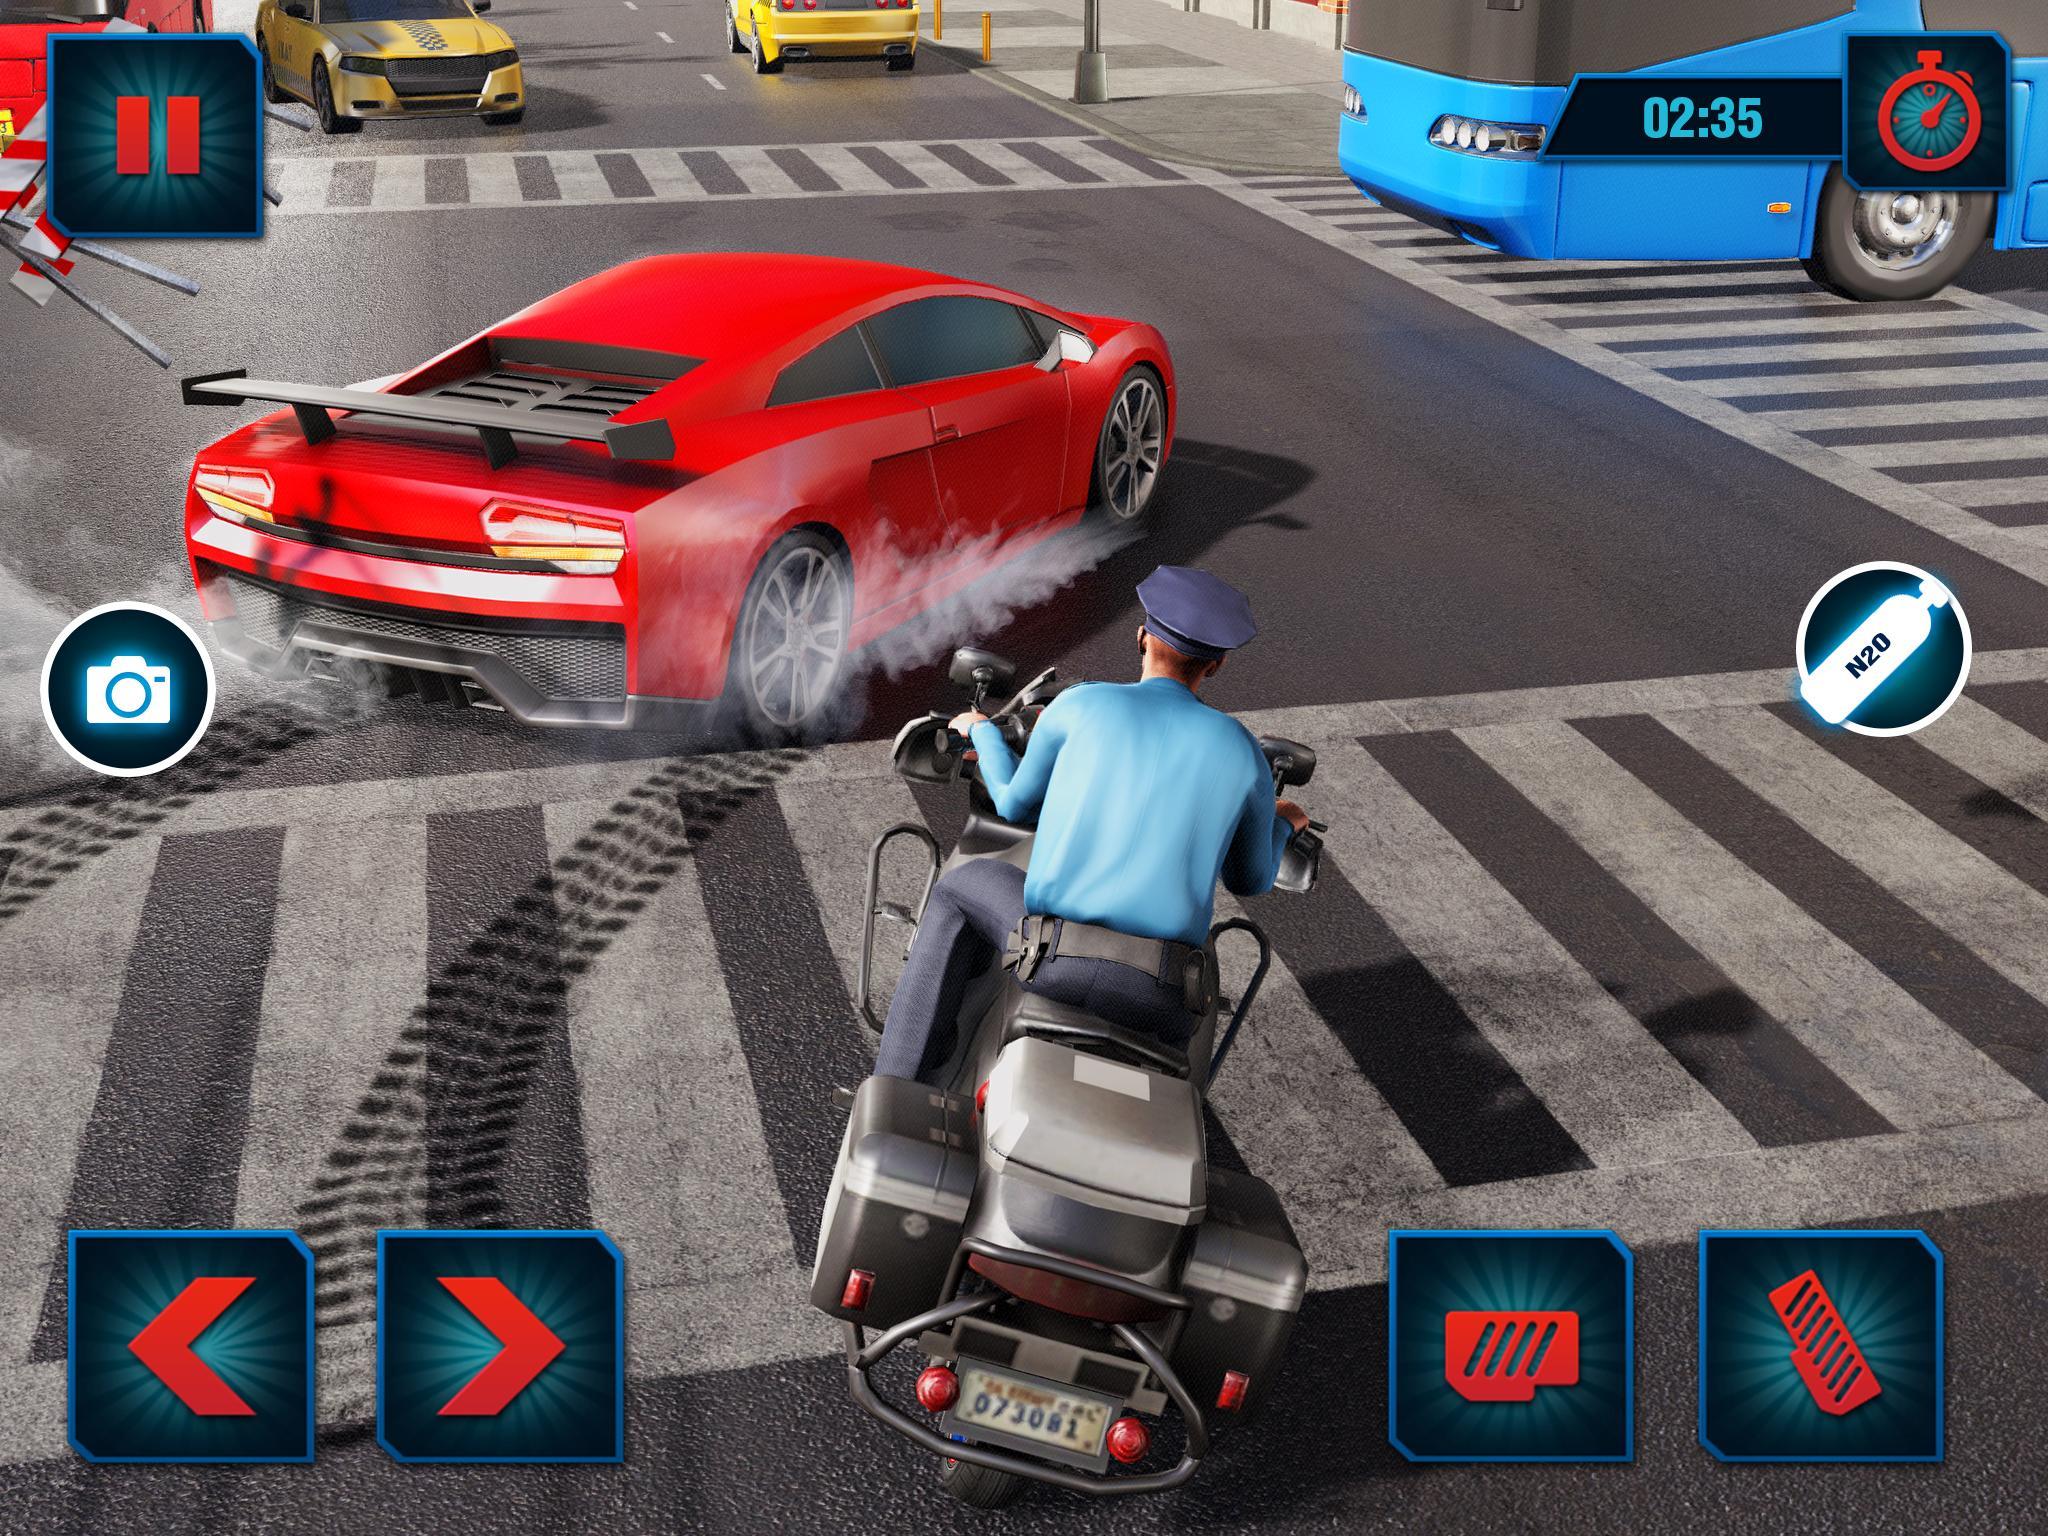 City Police Bike Chase Highway Bike Racing Game For Android Apk Download - epic motorcycle police chase in jailbreak roblox jail